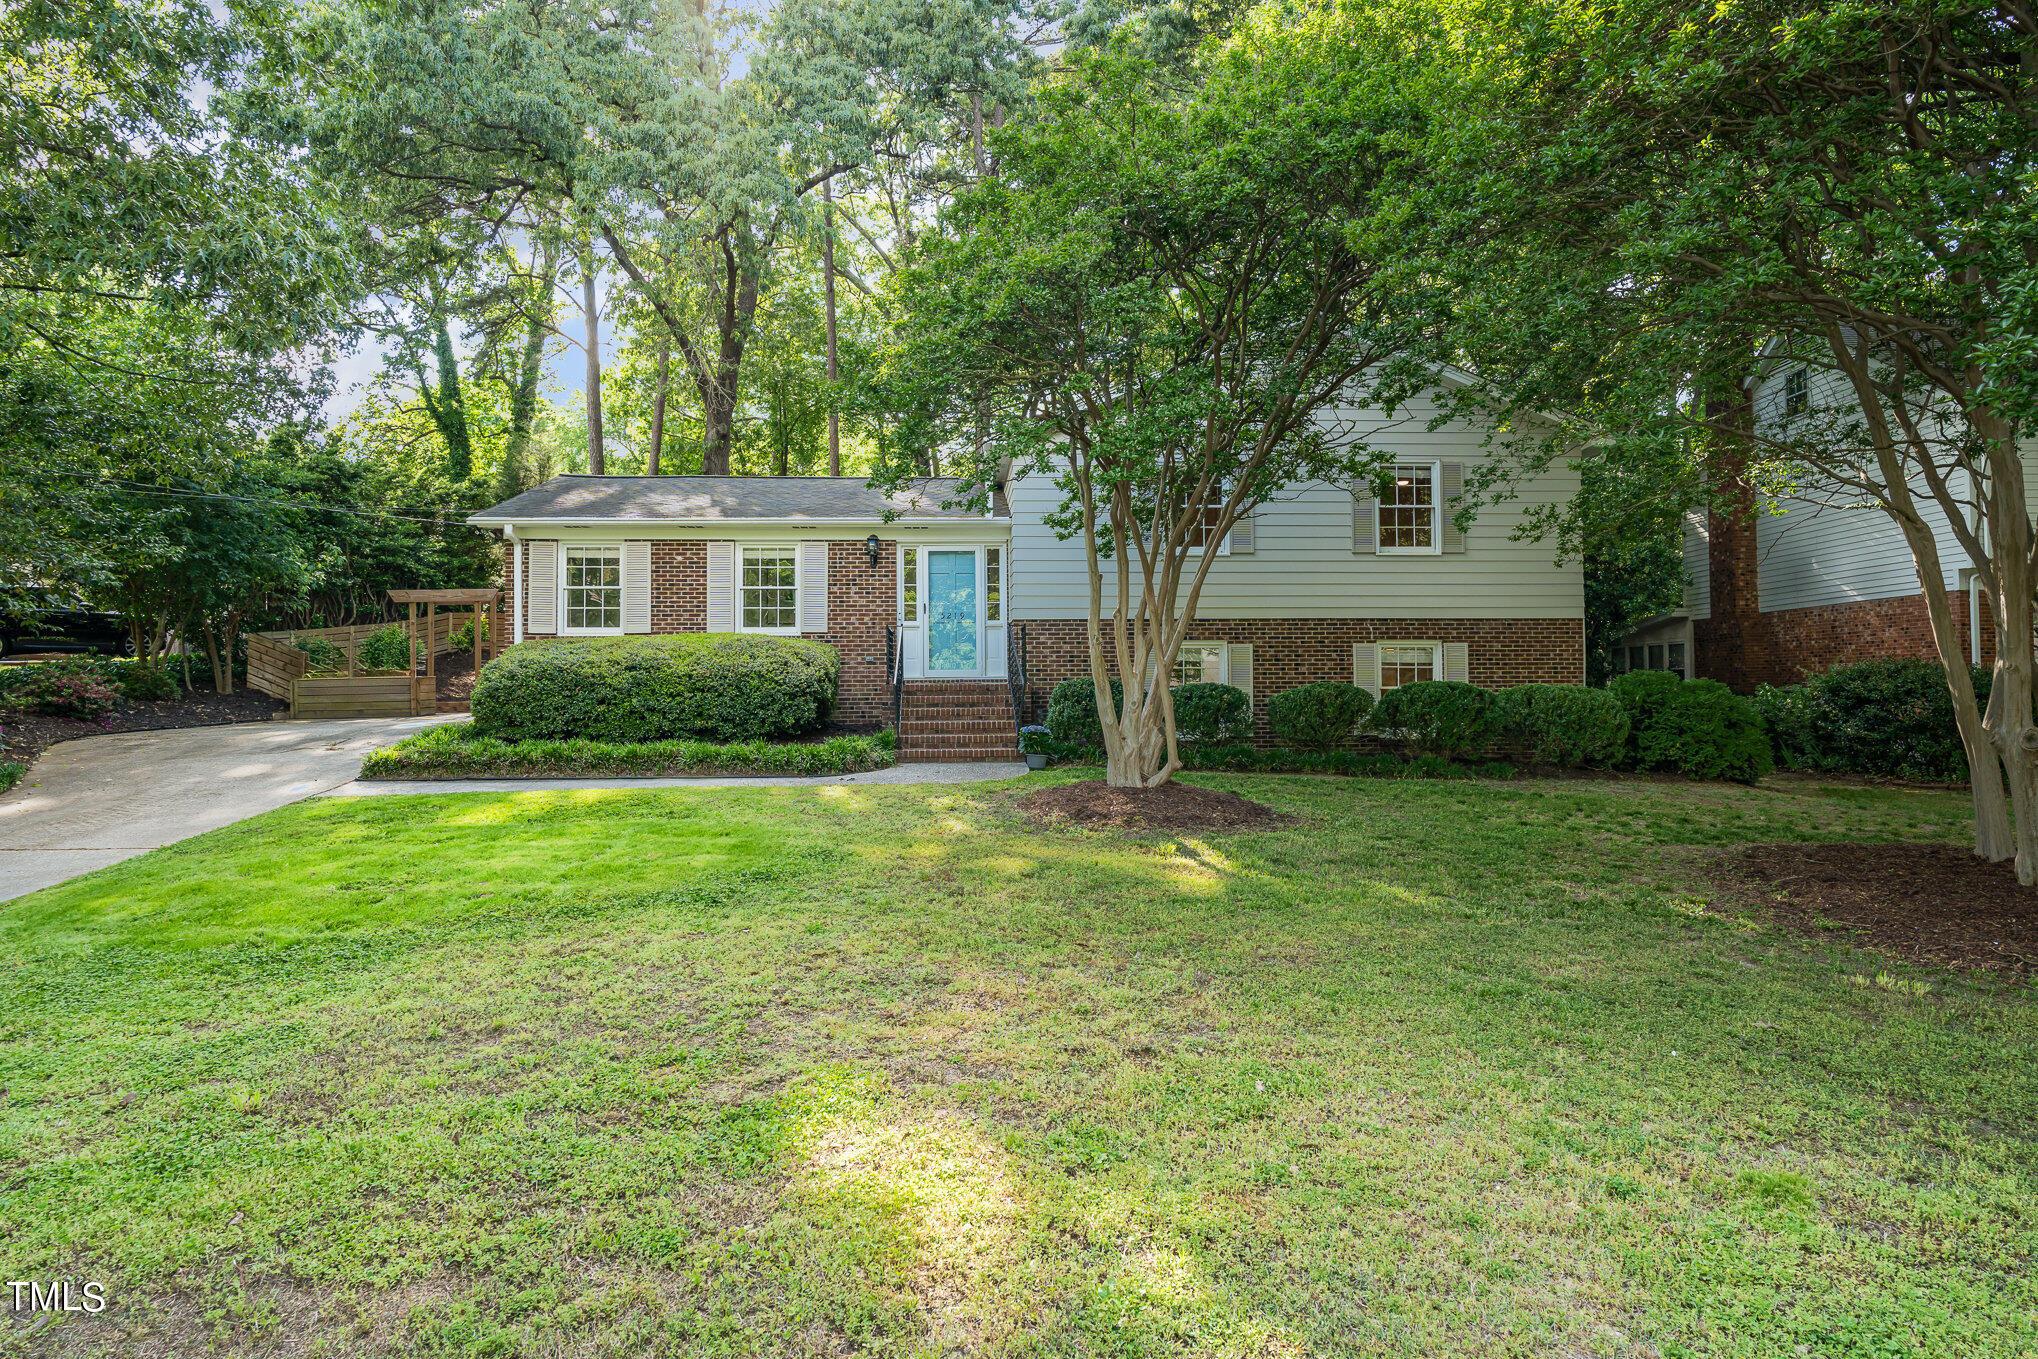 Photo one of 5219 Knollwood Rd Raleigh NC 27609 | MLS 10025084